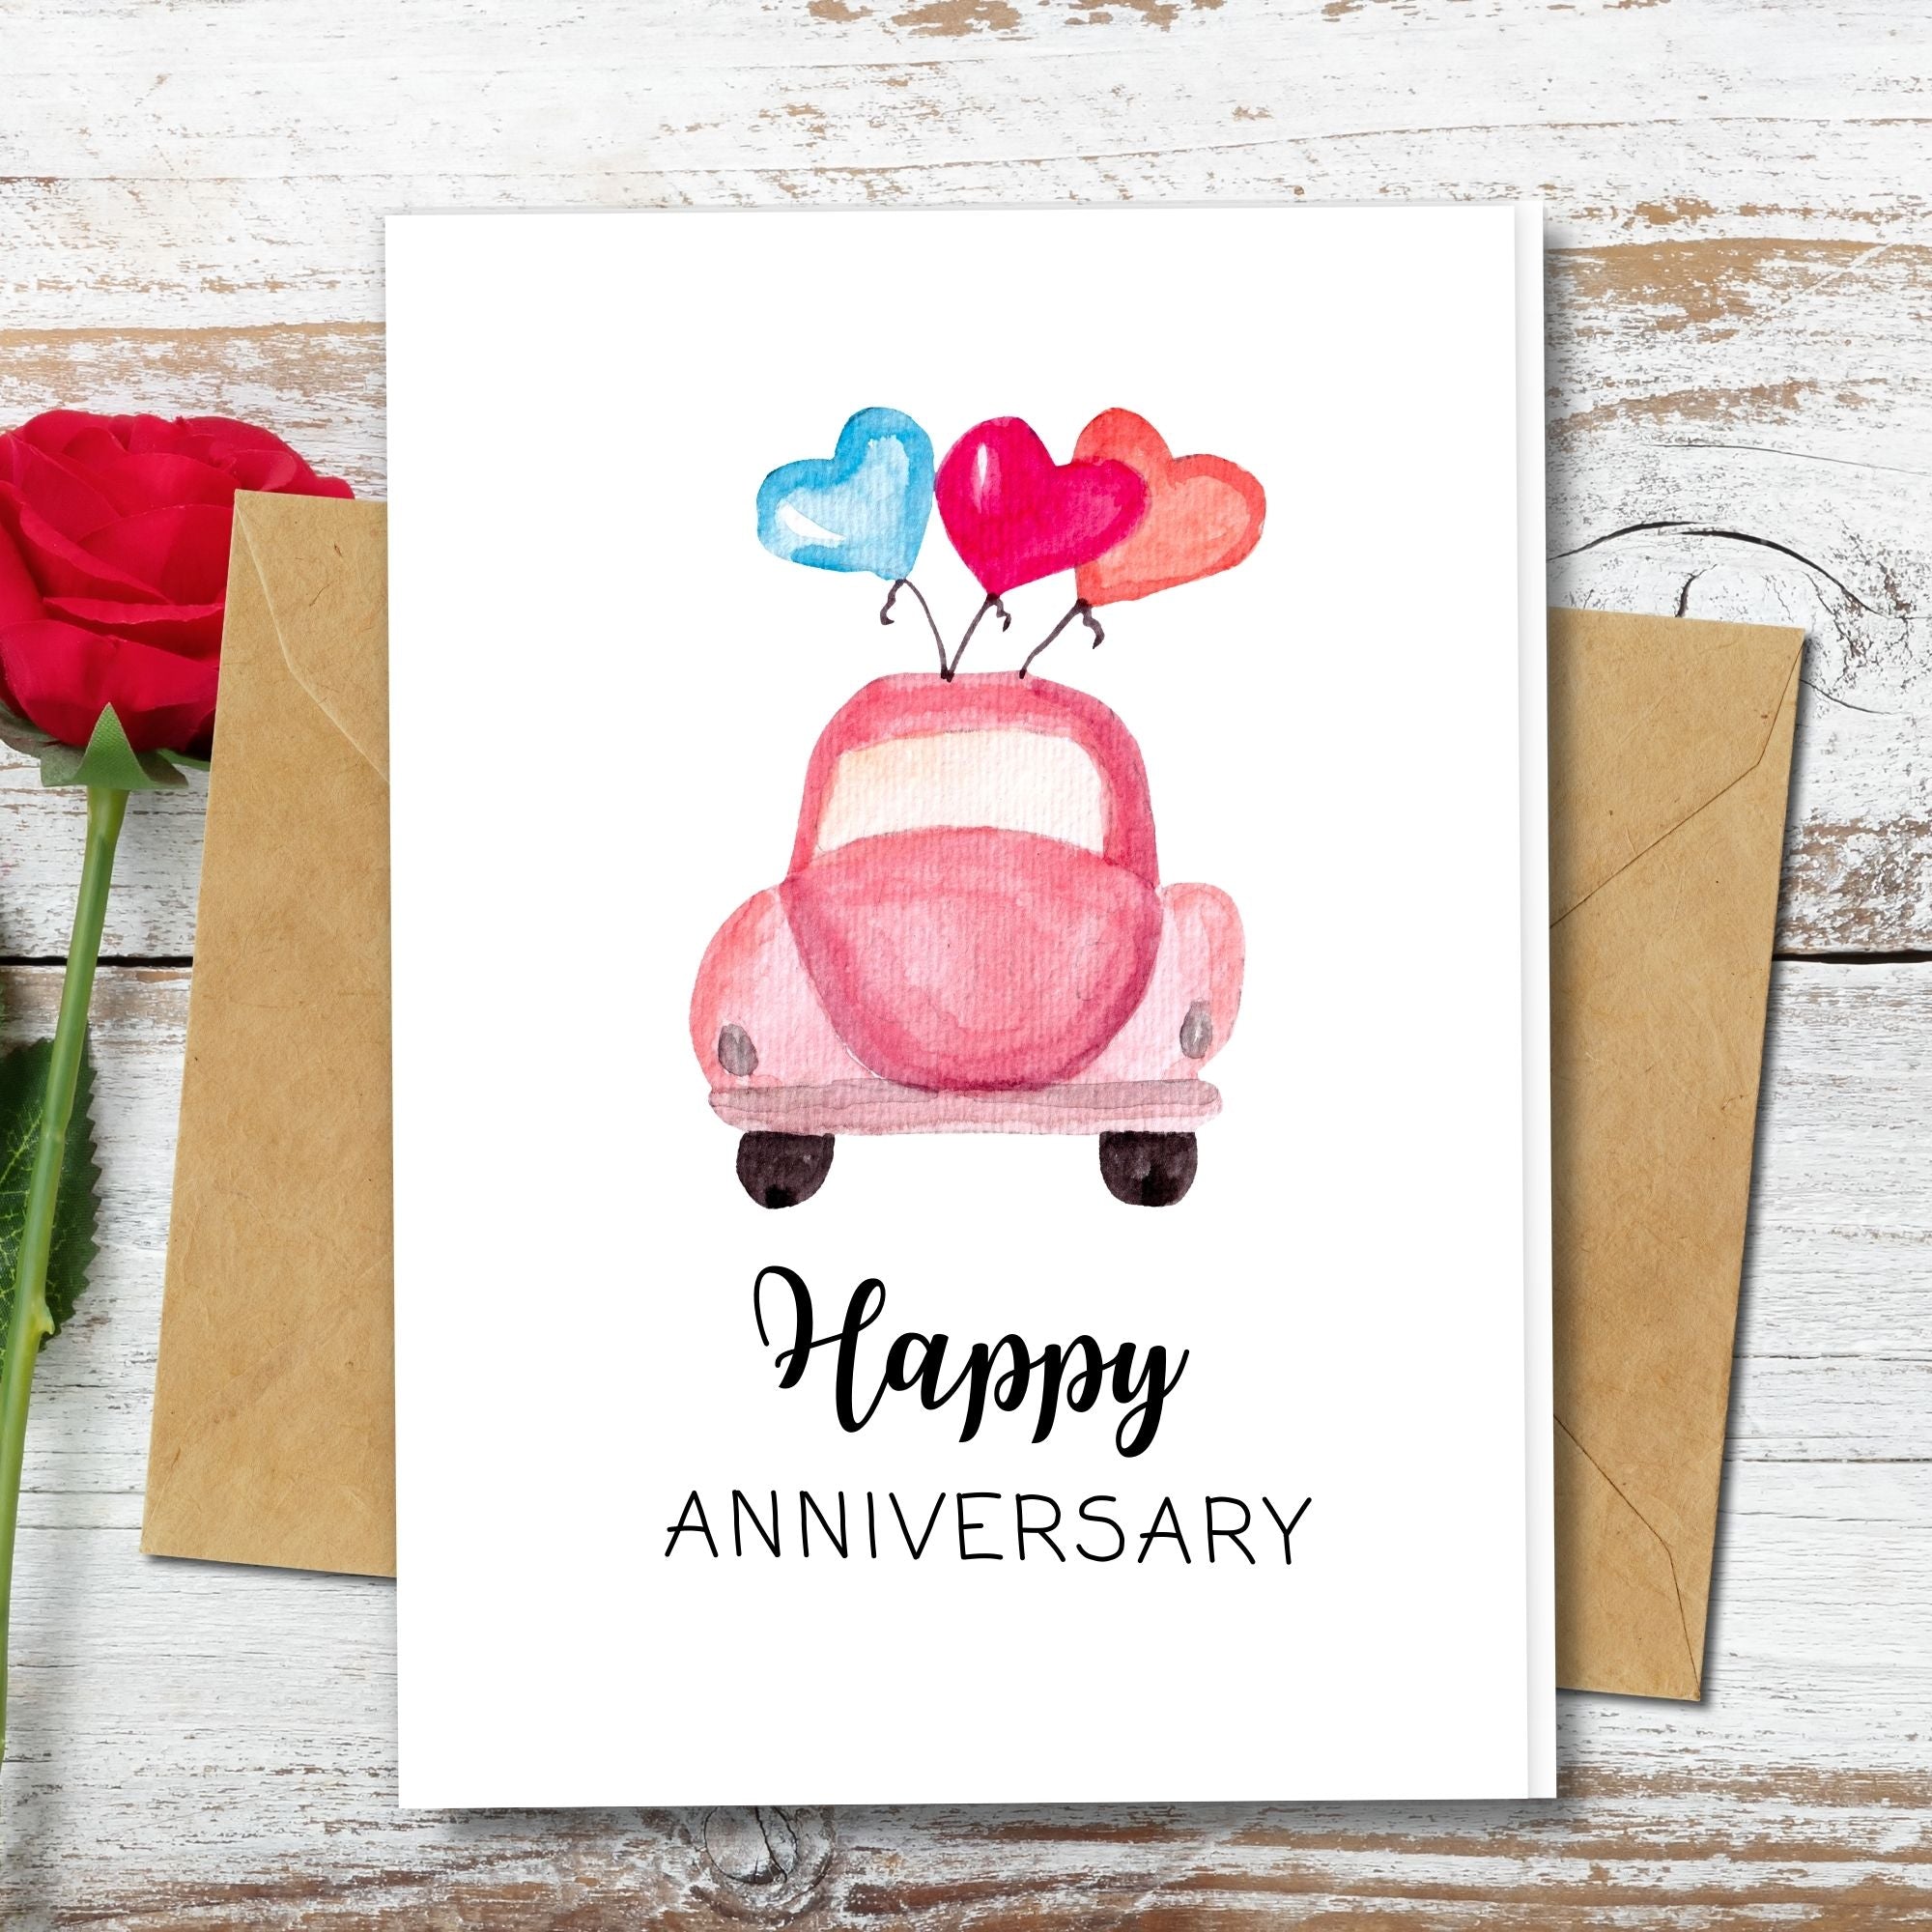 handmade anniversary cards, a pink car and heart shape balloons as a design made of plantable seed paper, recycled paper and more eco friendly paper